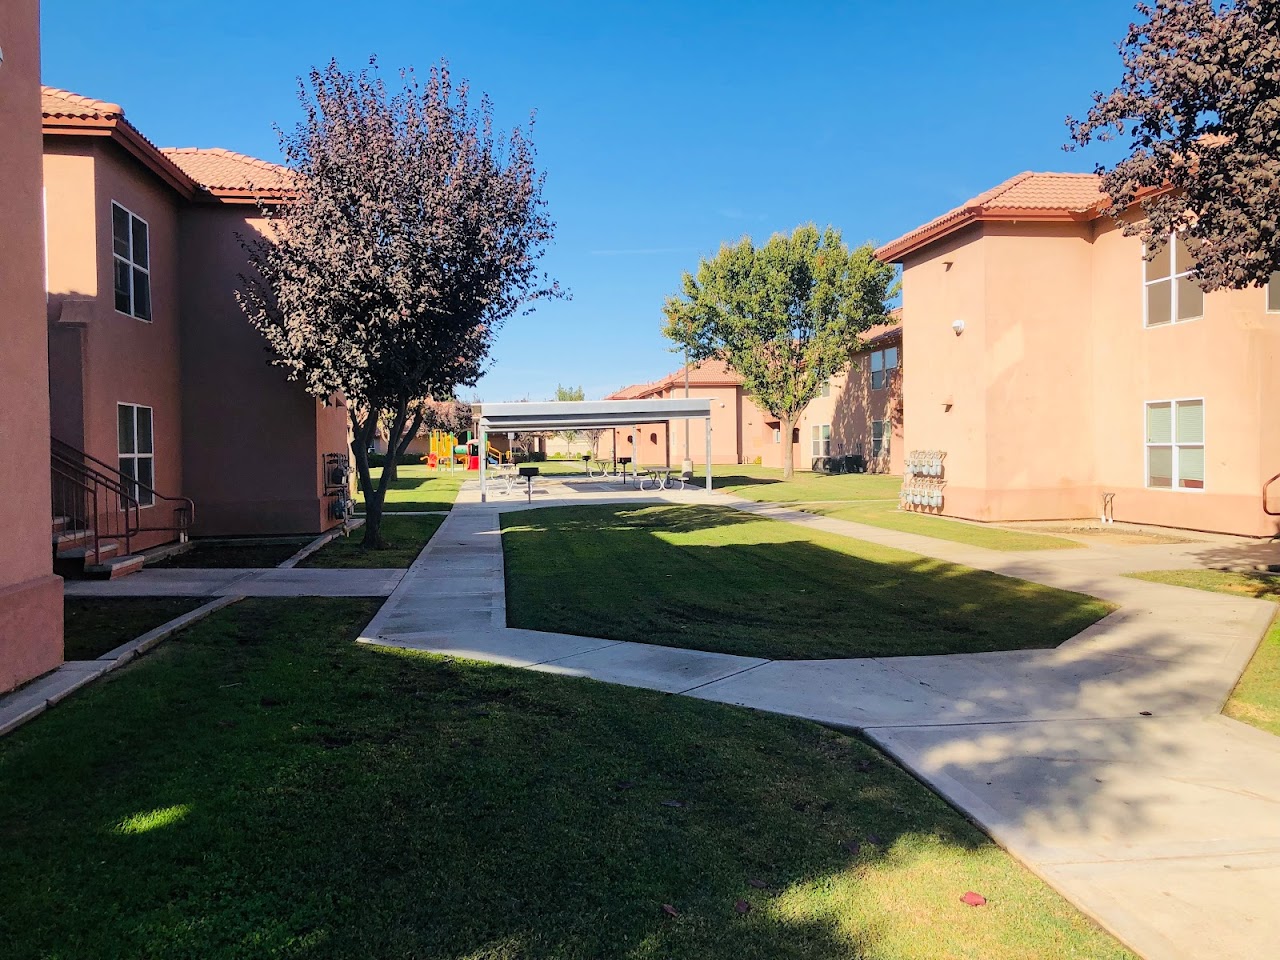 Photo of SUNSET VILLA APTS. Affordable housing located at 1950 PALM AVE WASCO, CA 93280